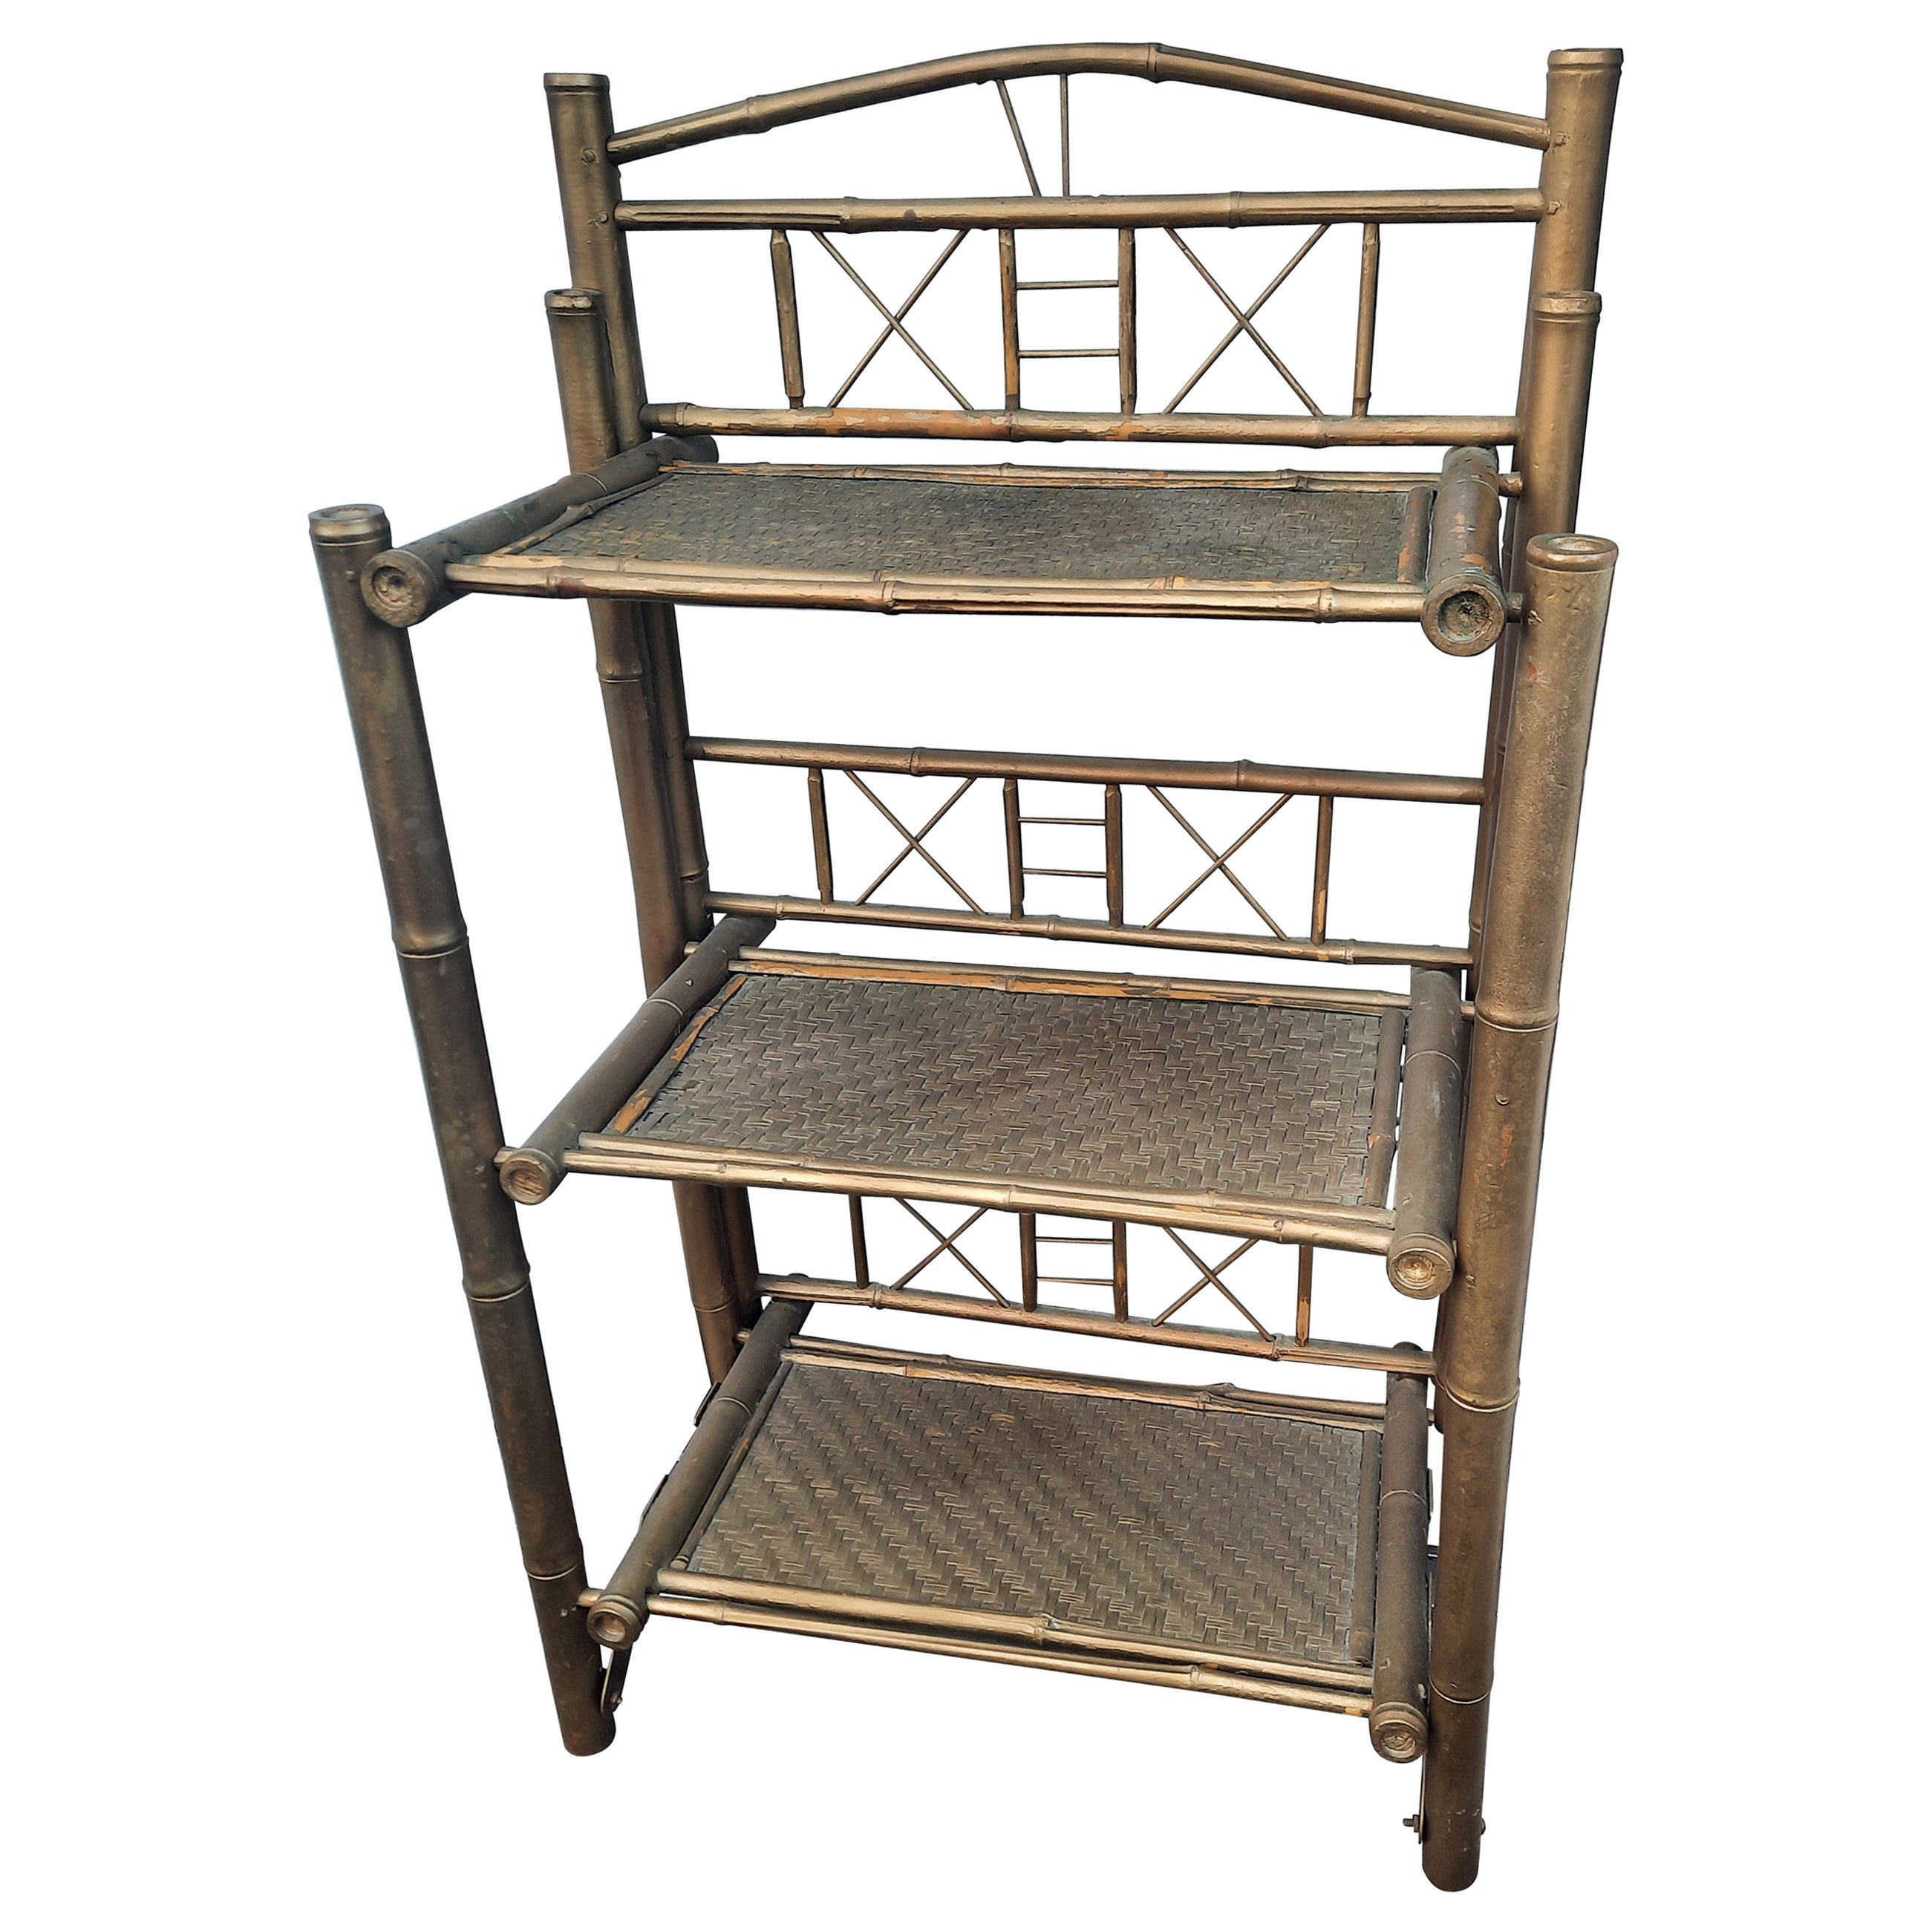 Hand-Crafted Antique Golden Tortoise Bamboo and Woven Wicker Etagere Bookshelf For Sale